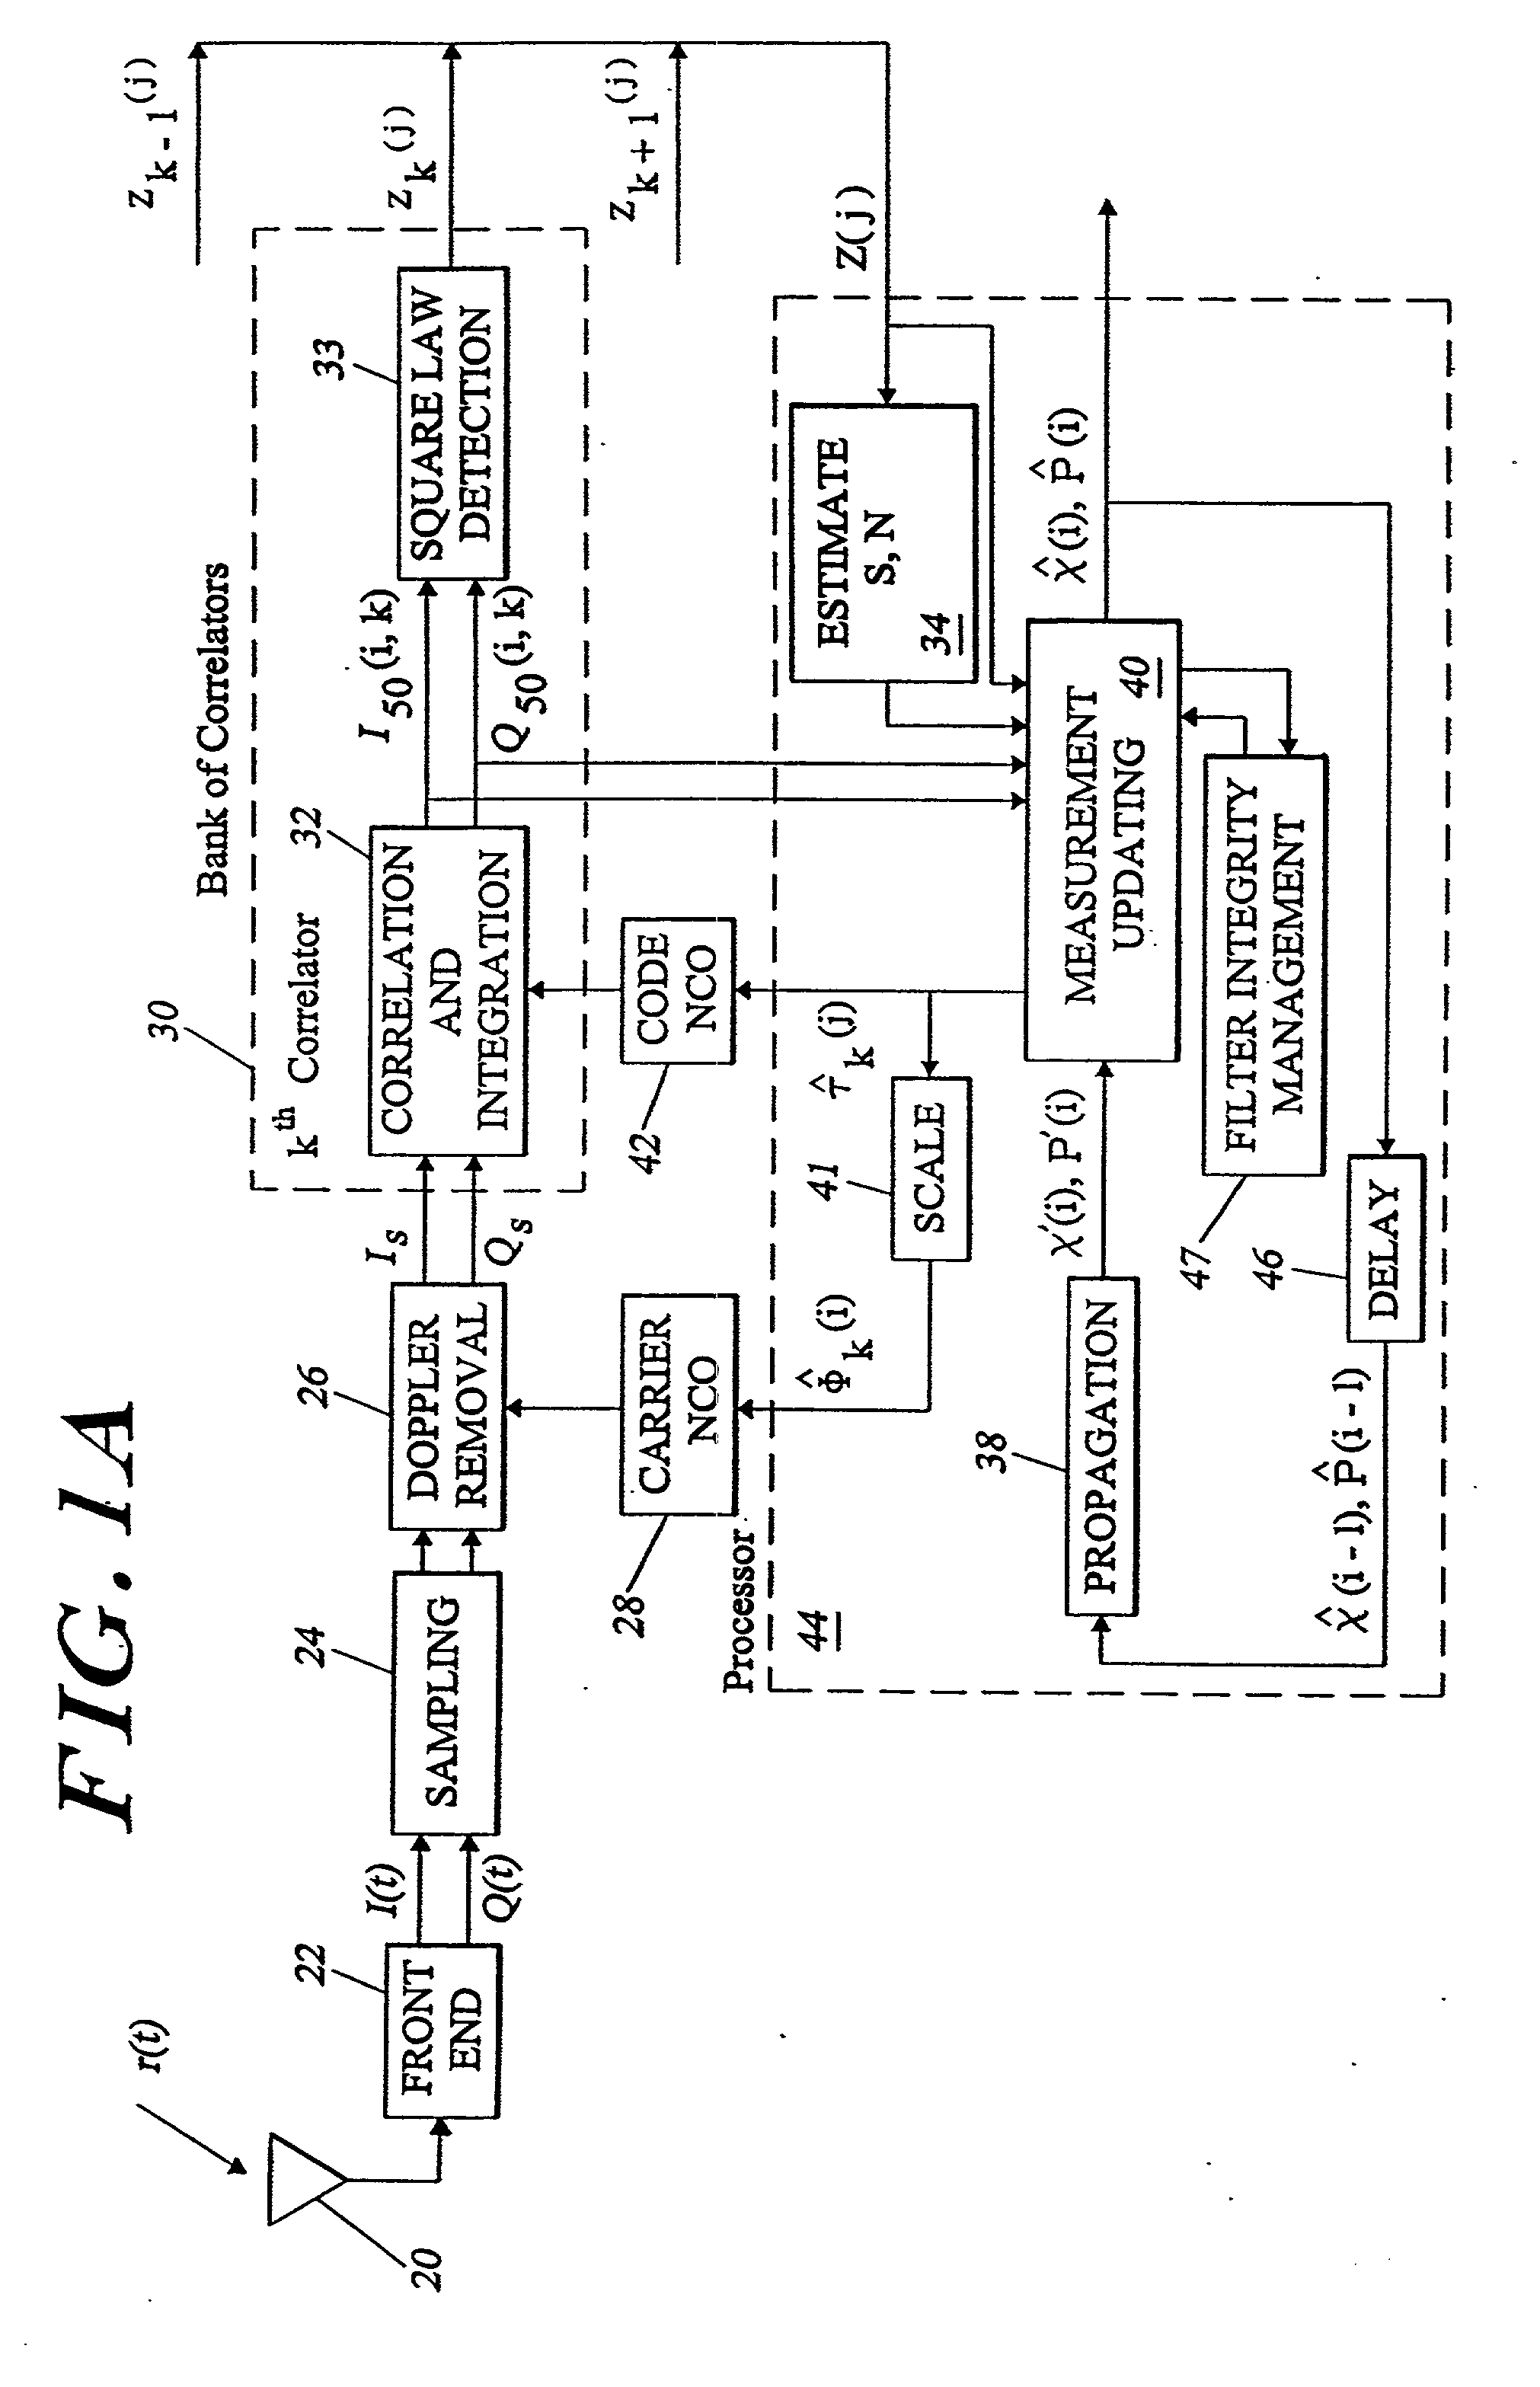 Deeply-integrated adaptive GPS-based navigator with extended-range code tracking